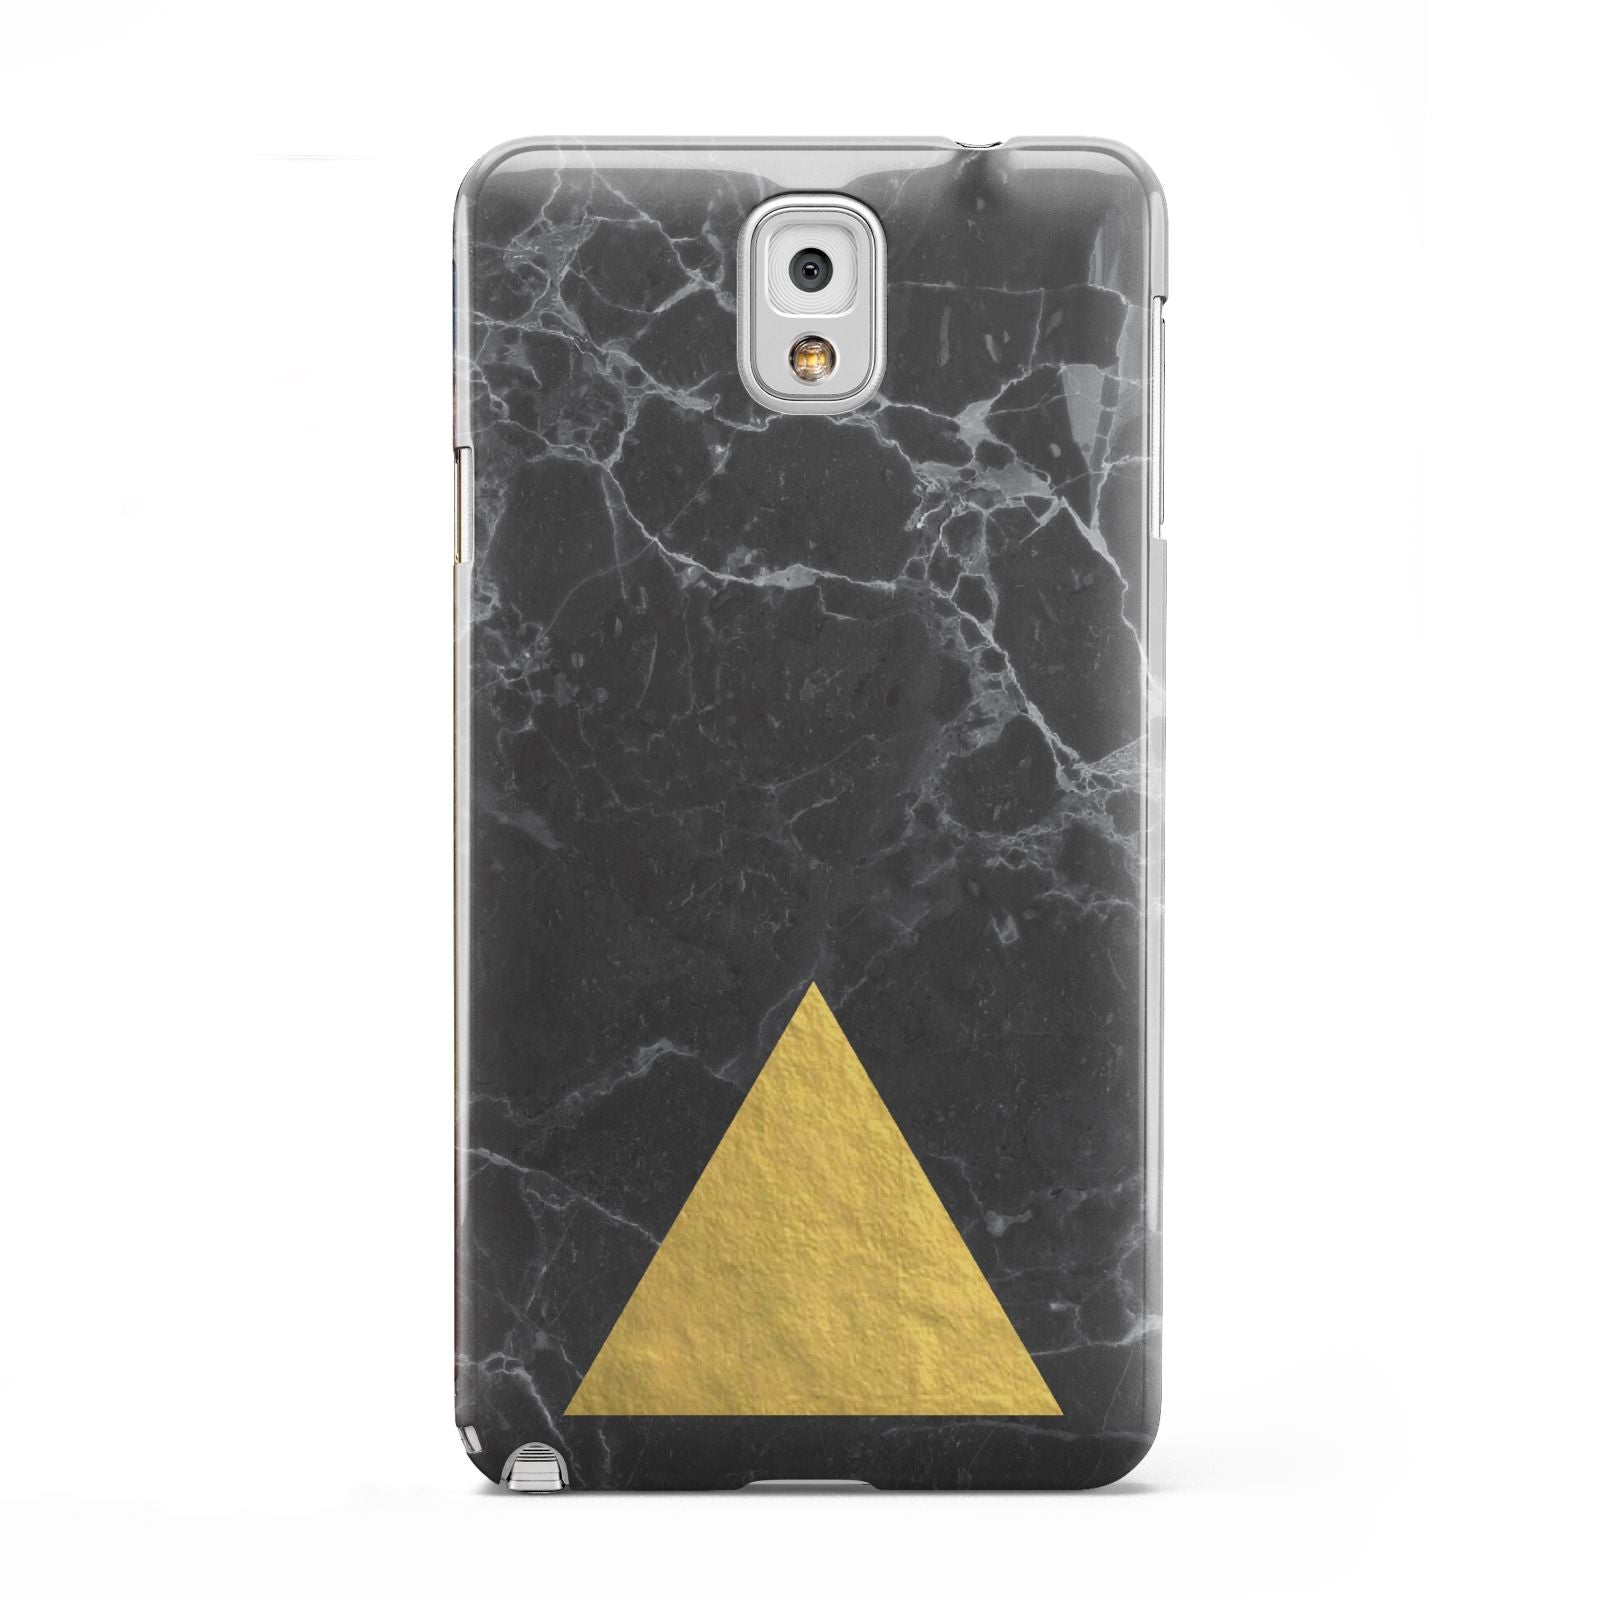 Marble Black Gold Foil Samsung Galaxy Note 3 Case